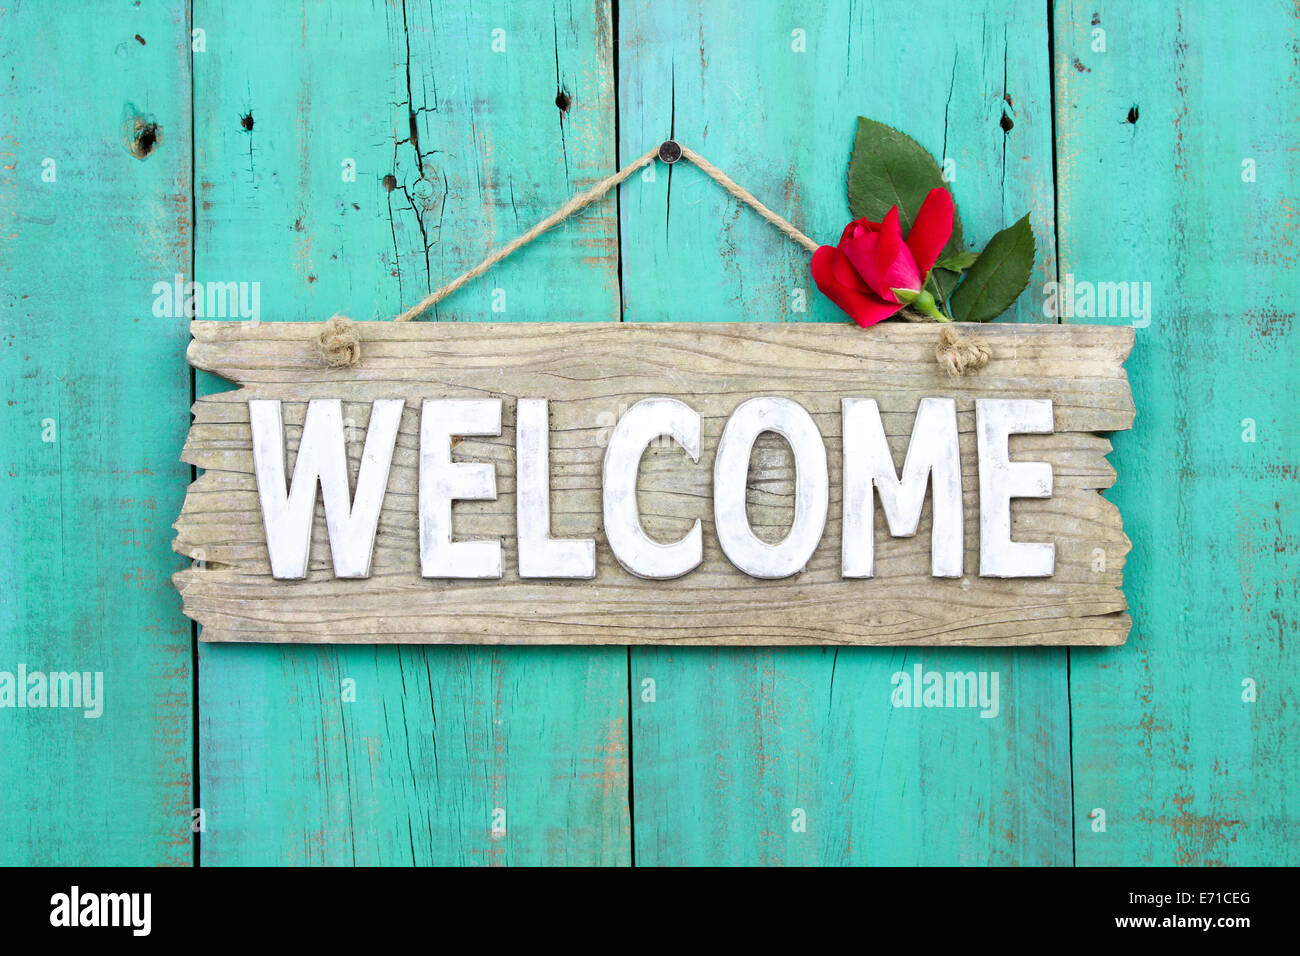 Weathered welcome sign with red rose bud hanging on antique green old wood door Stock Photo